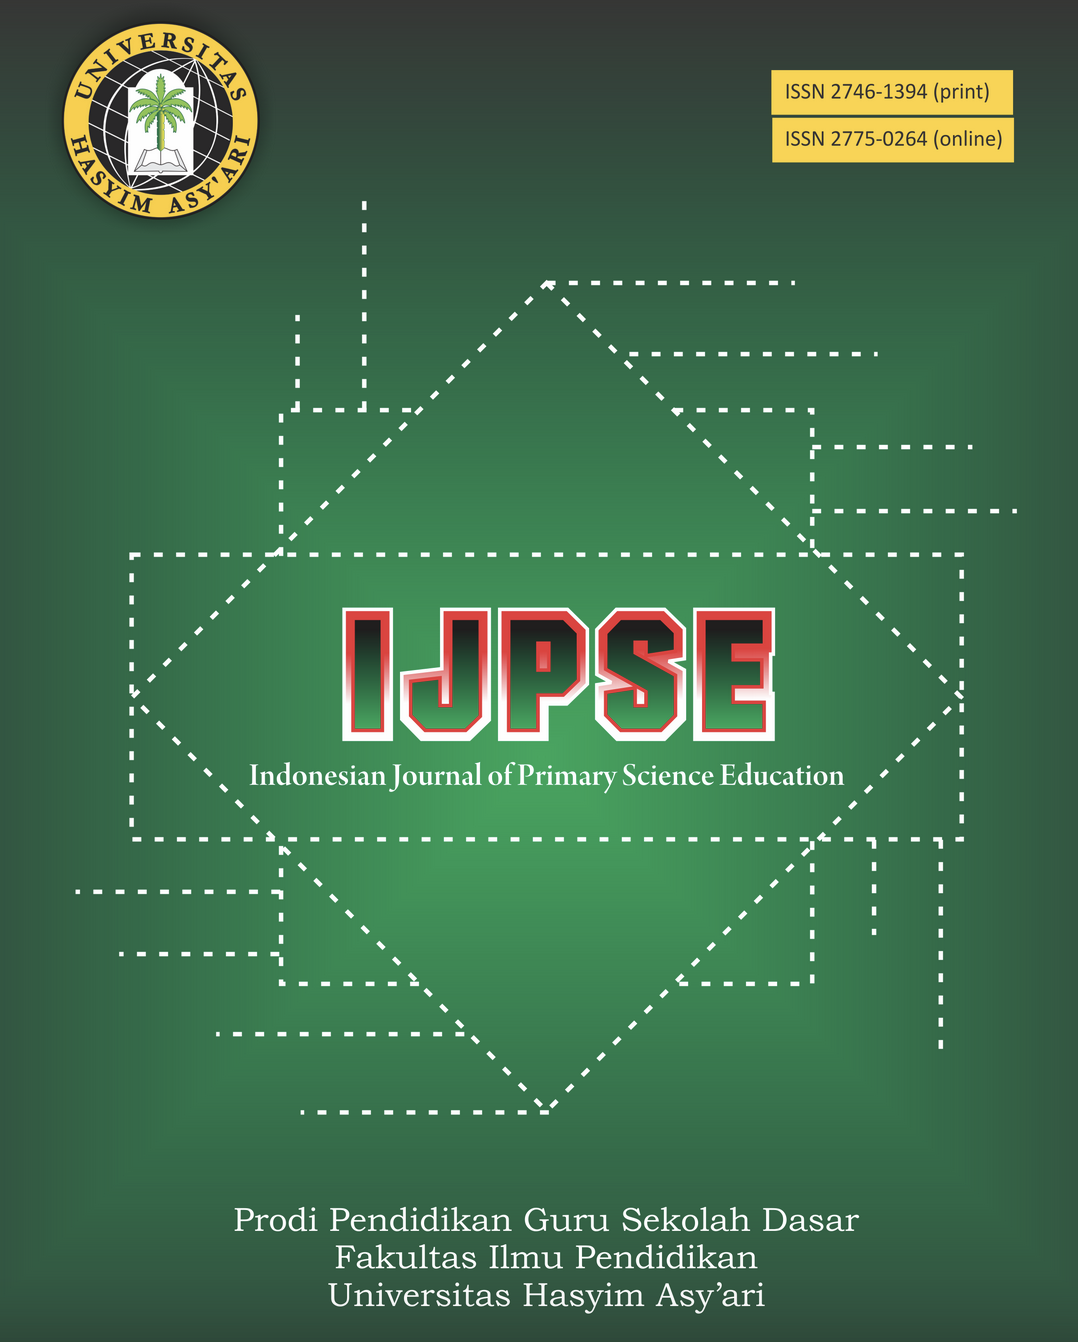 "Indonesian Journal of Primary Science Education (IJPSE)"